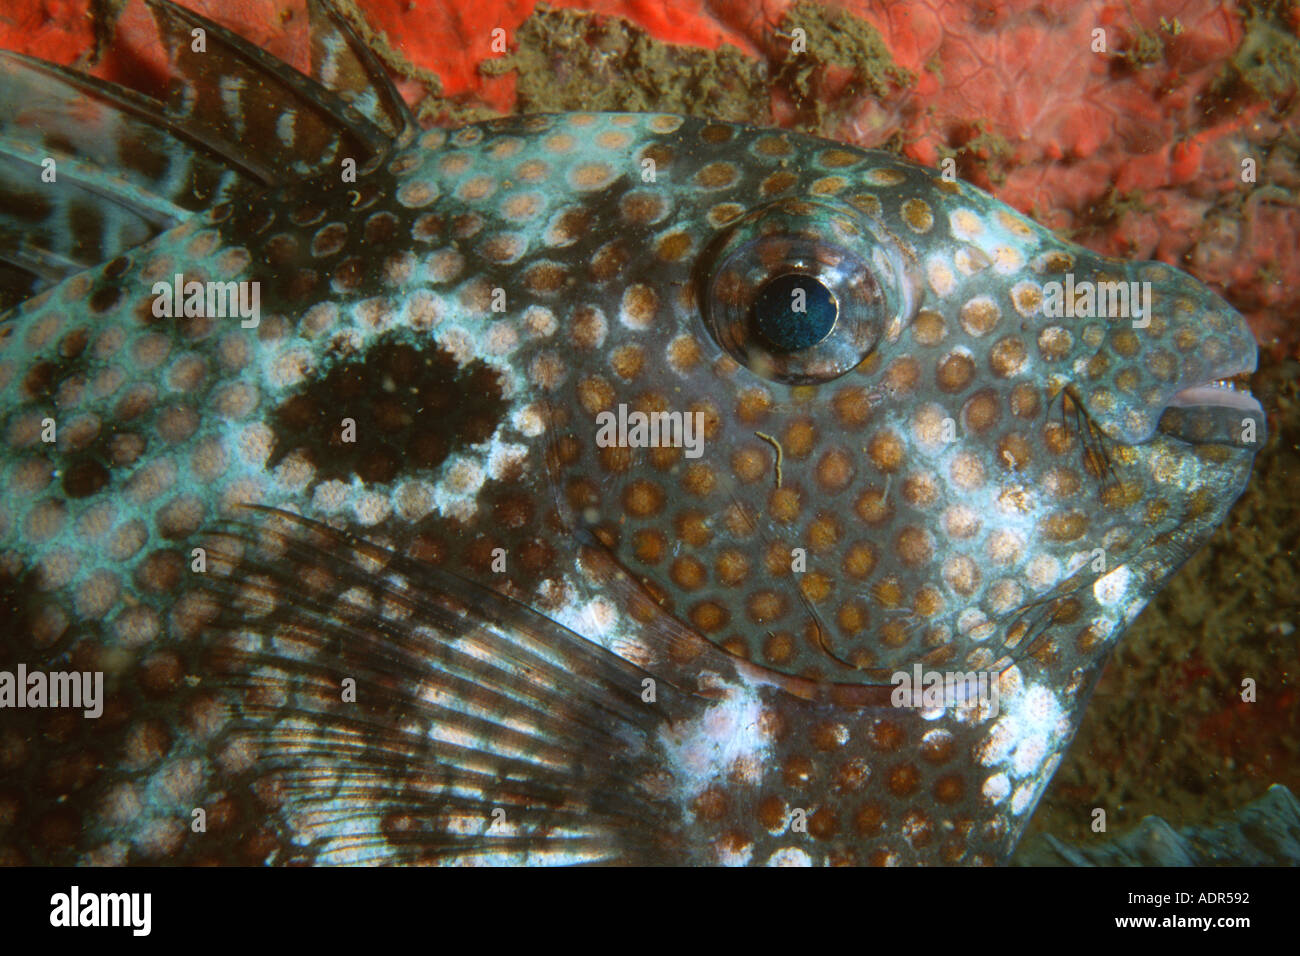 Spotted rabbitfish at night Siganus guttatus head detail Coral Queen shipwreck Madang Papua New Guinea South Pacific Stock Photo